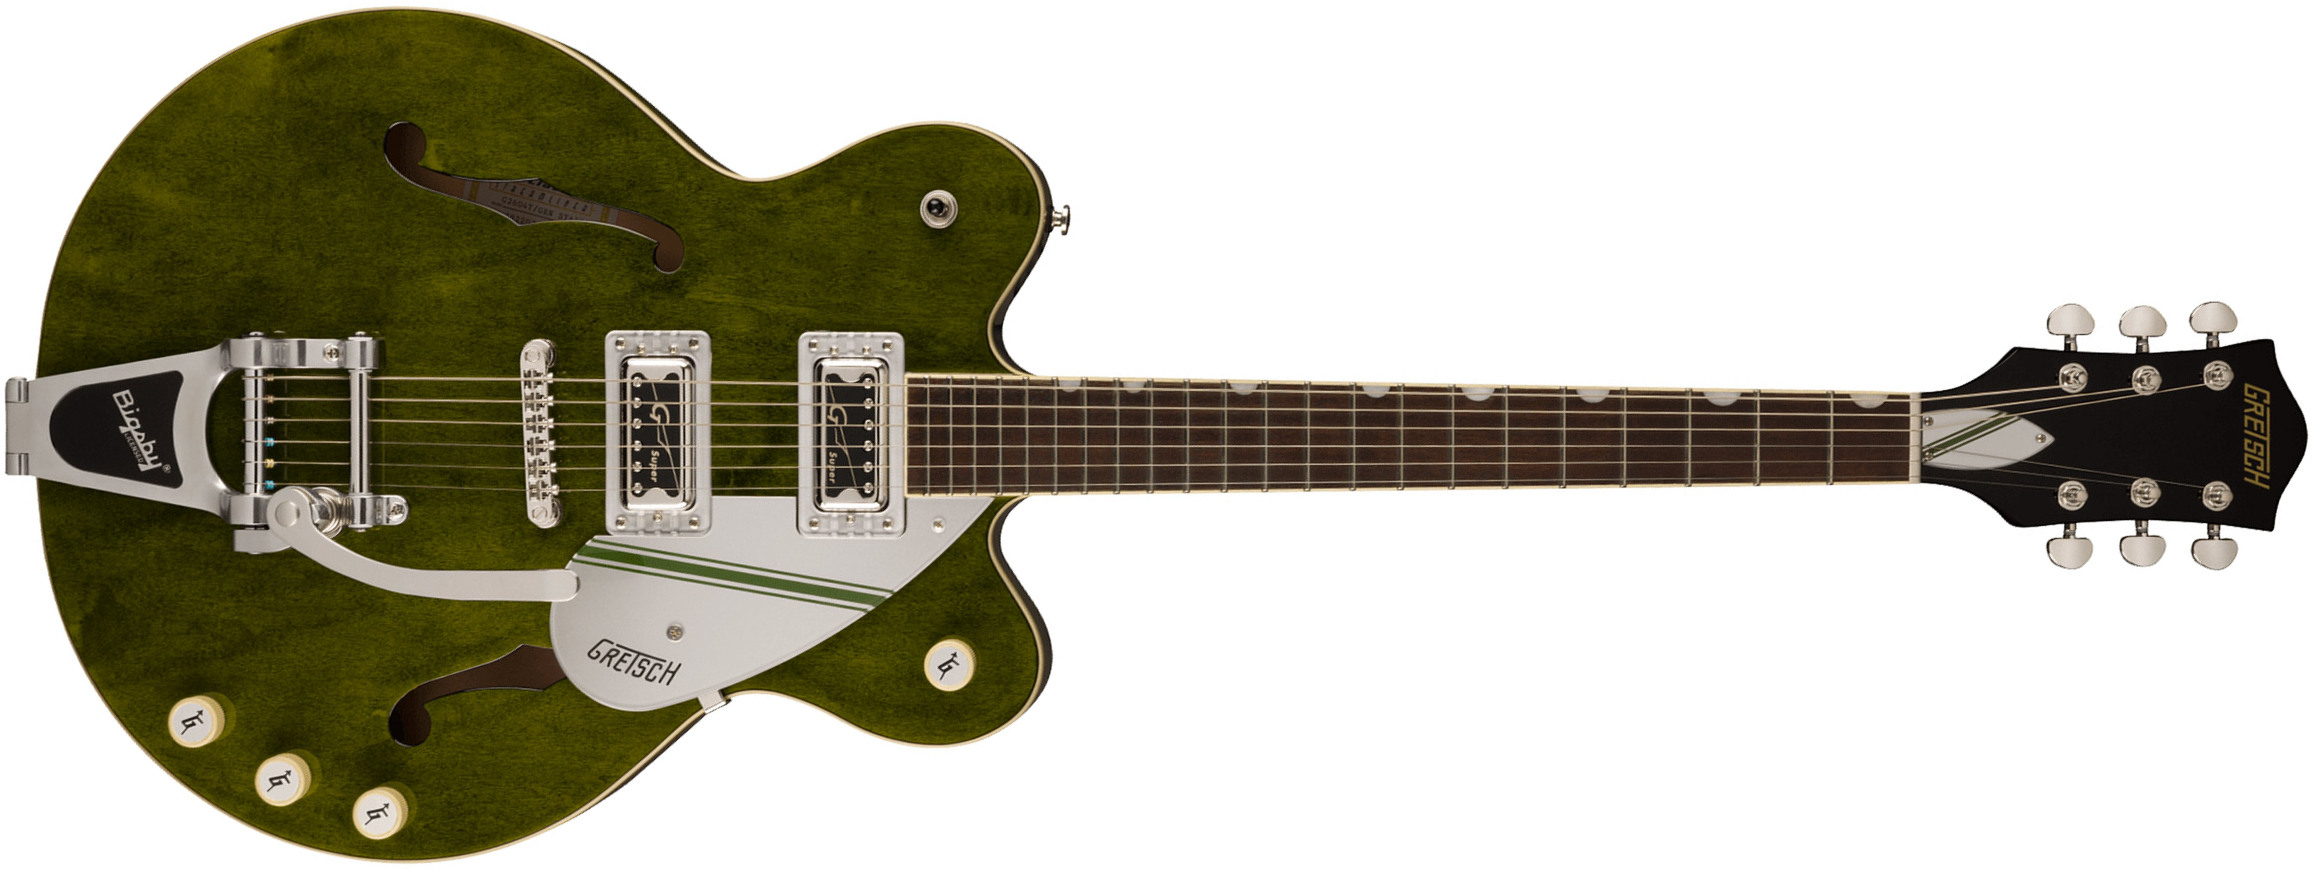 Gretsch G2604t Streamliner Rally Ii Center Block Dc Bigsby 2h Trem Lau - Rally Green Stain - Guitarra eléctrica semi caja - Main picture